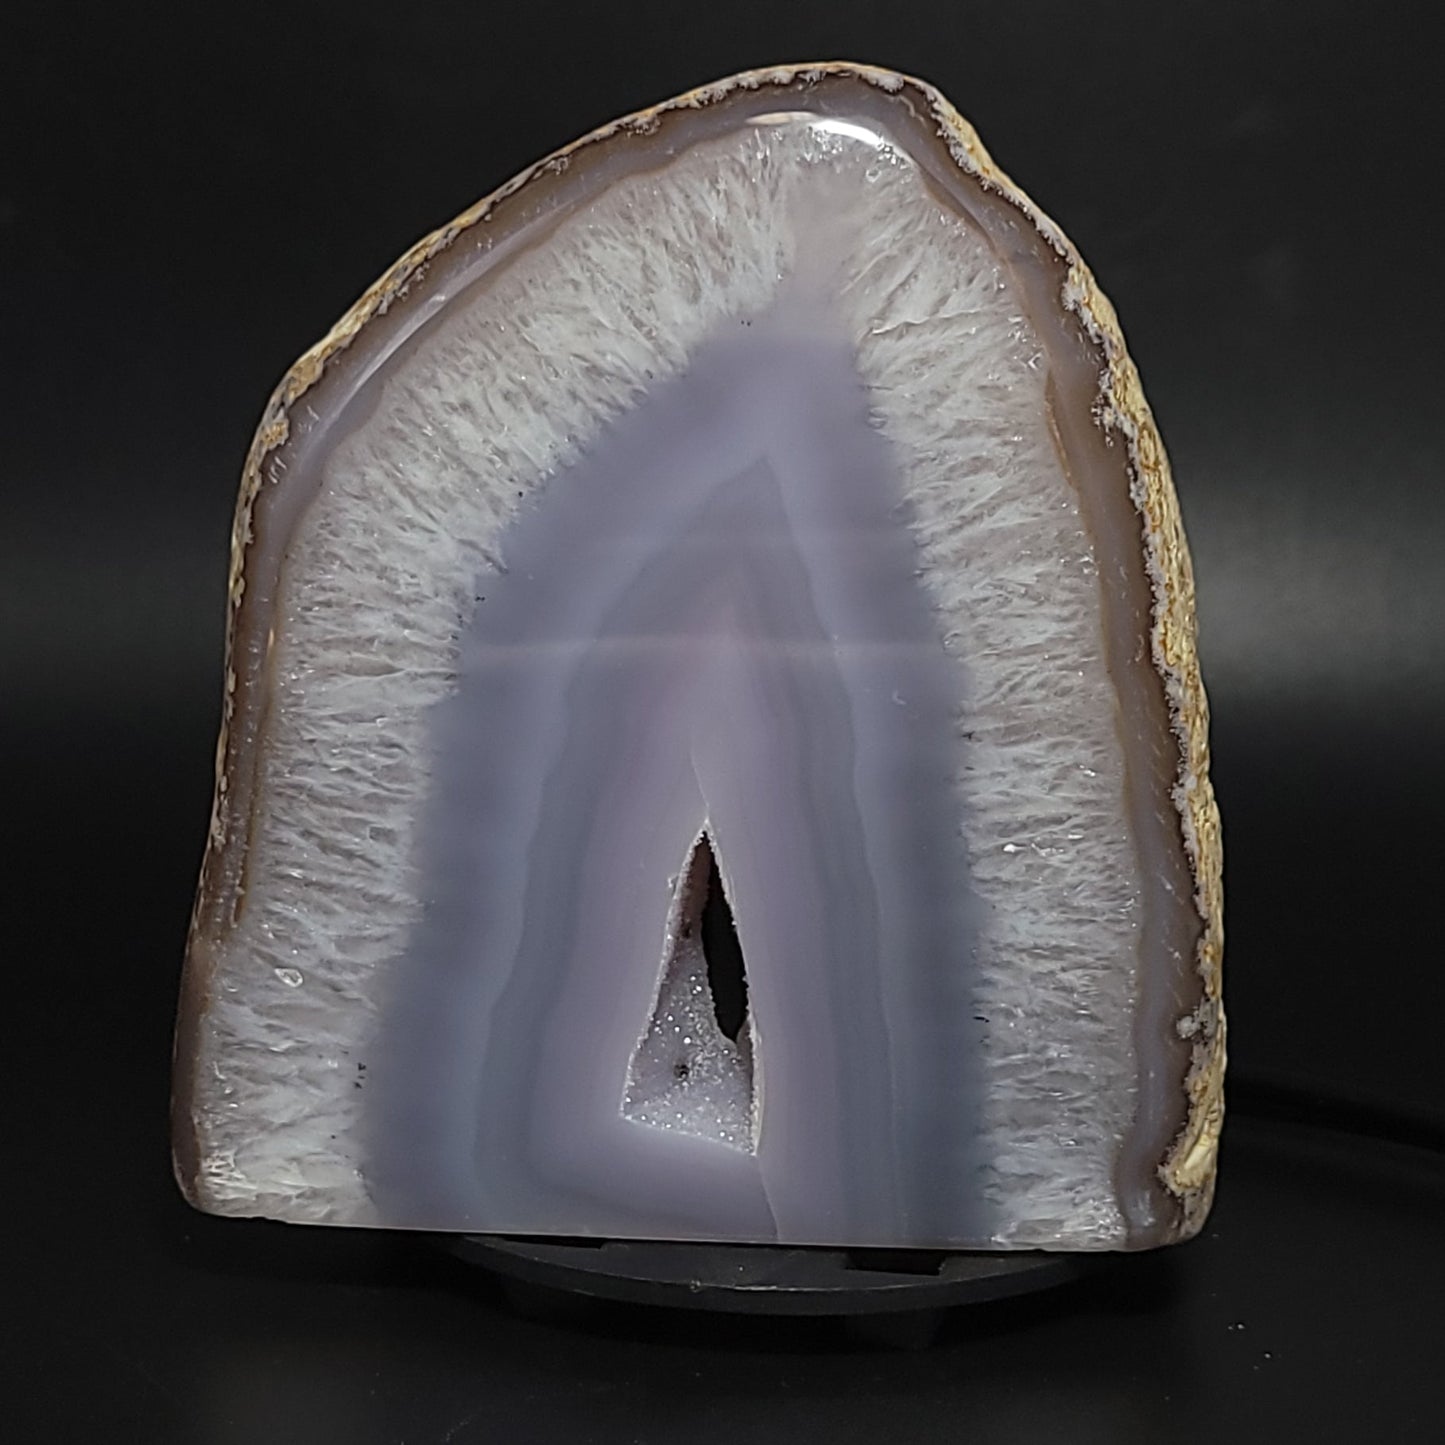 Agate Lamp Polished Agate Light - Elevated Metaphysical